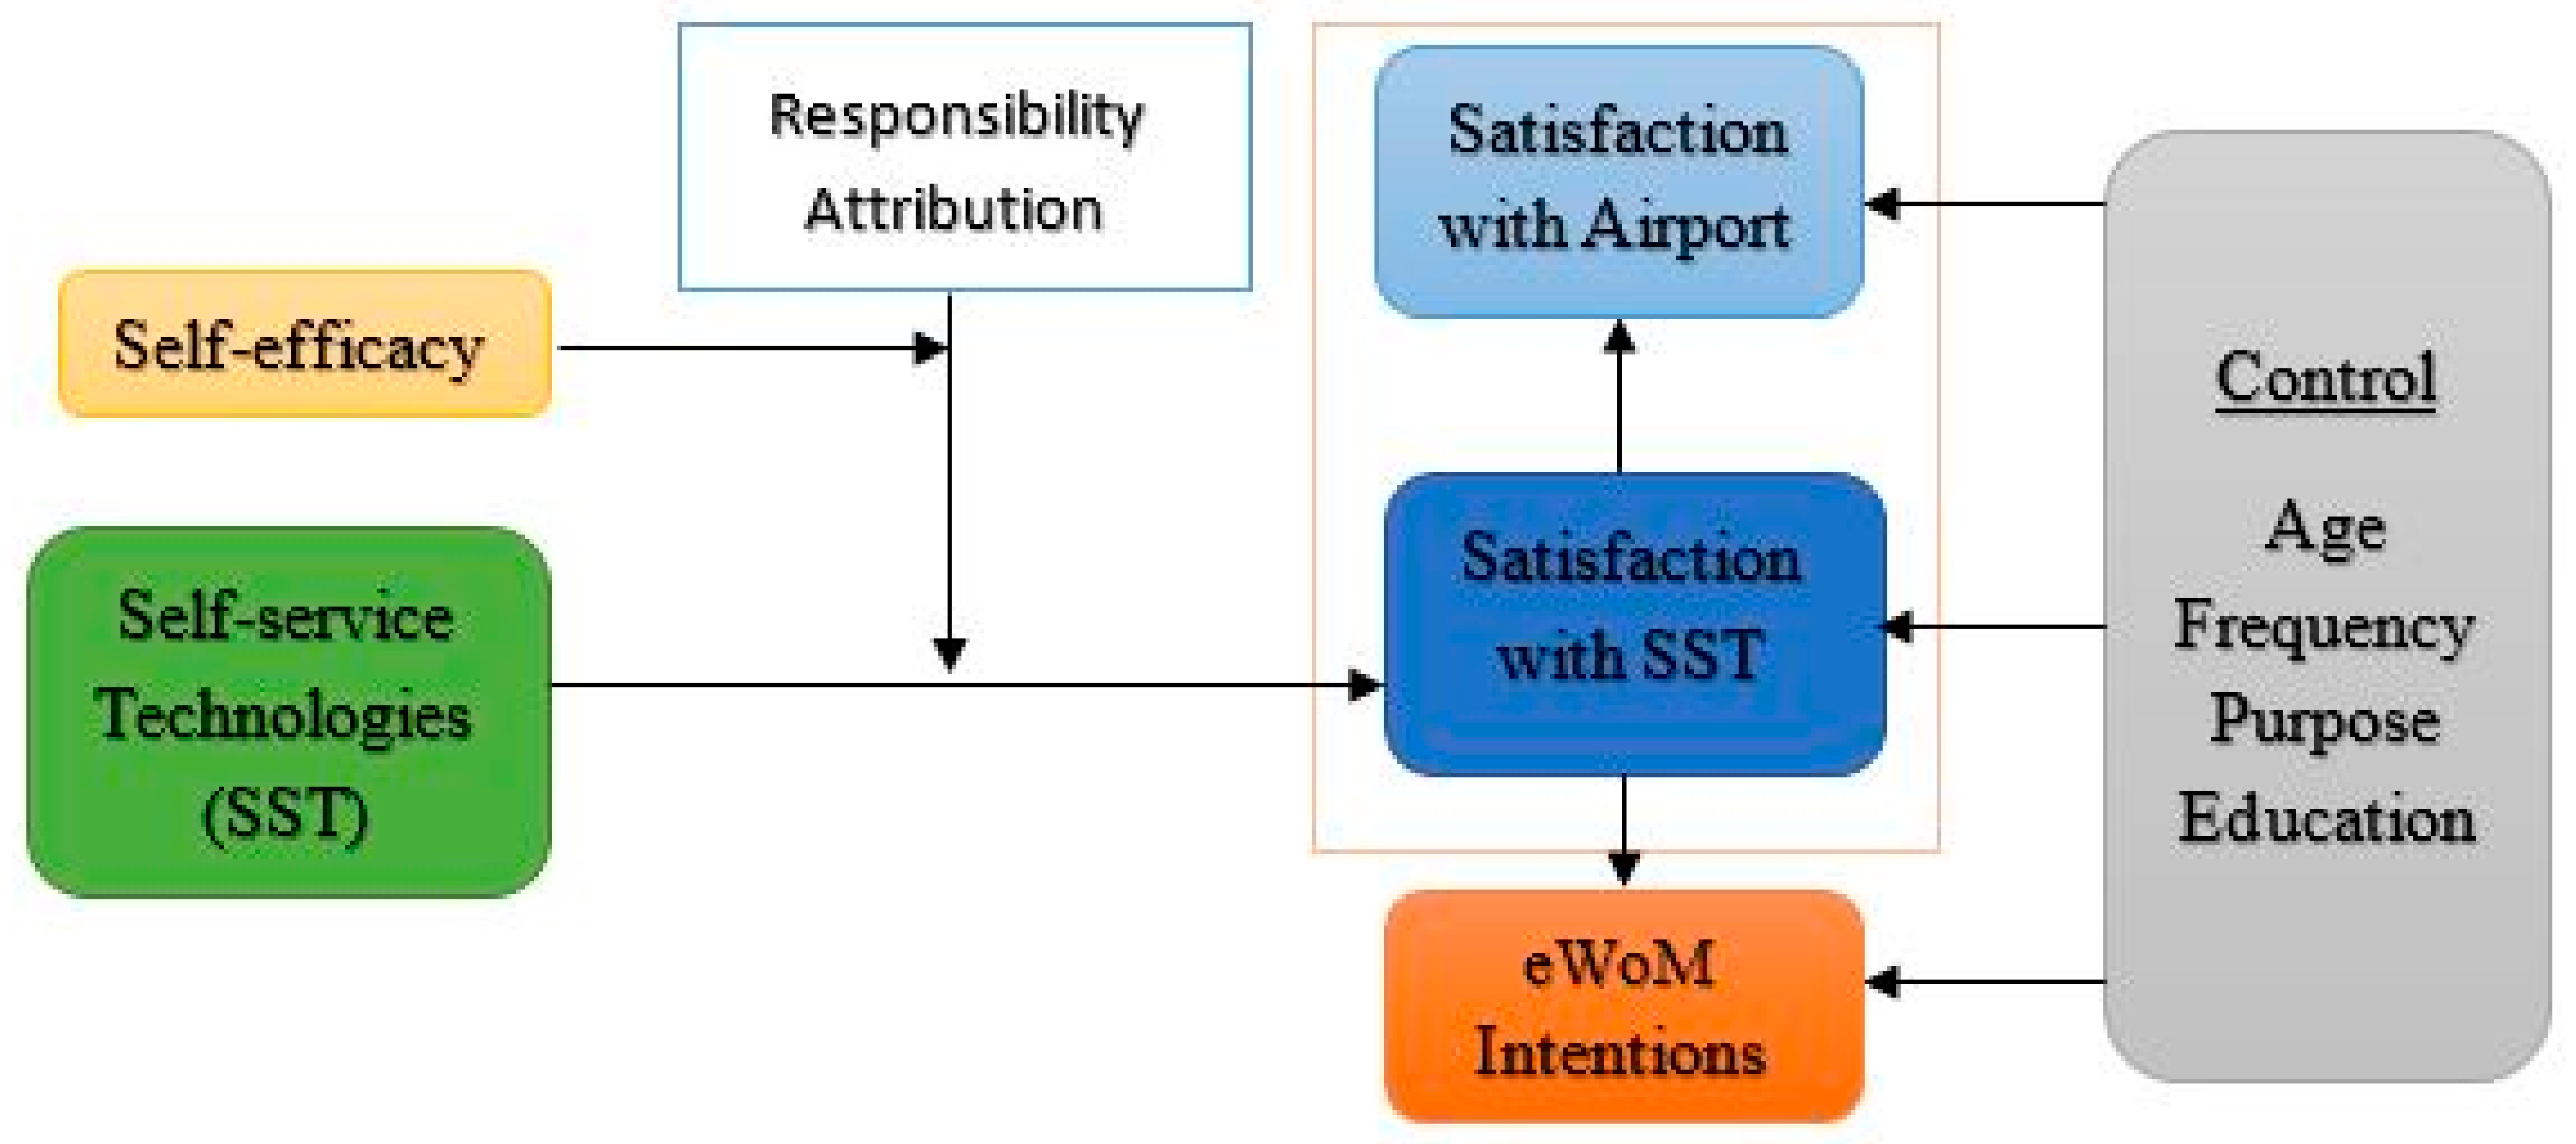 A Model Of The Effects Of Self-efficacy On The Perceived